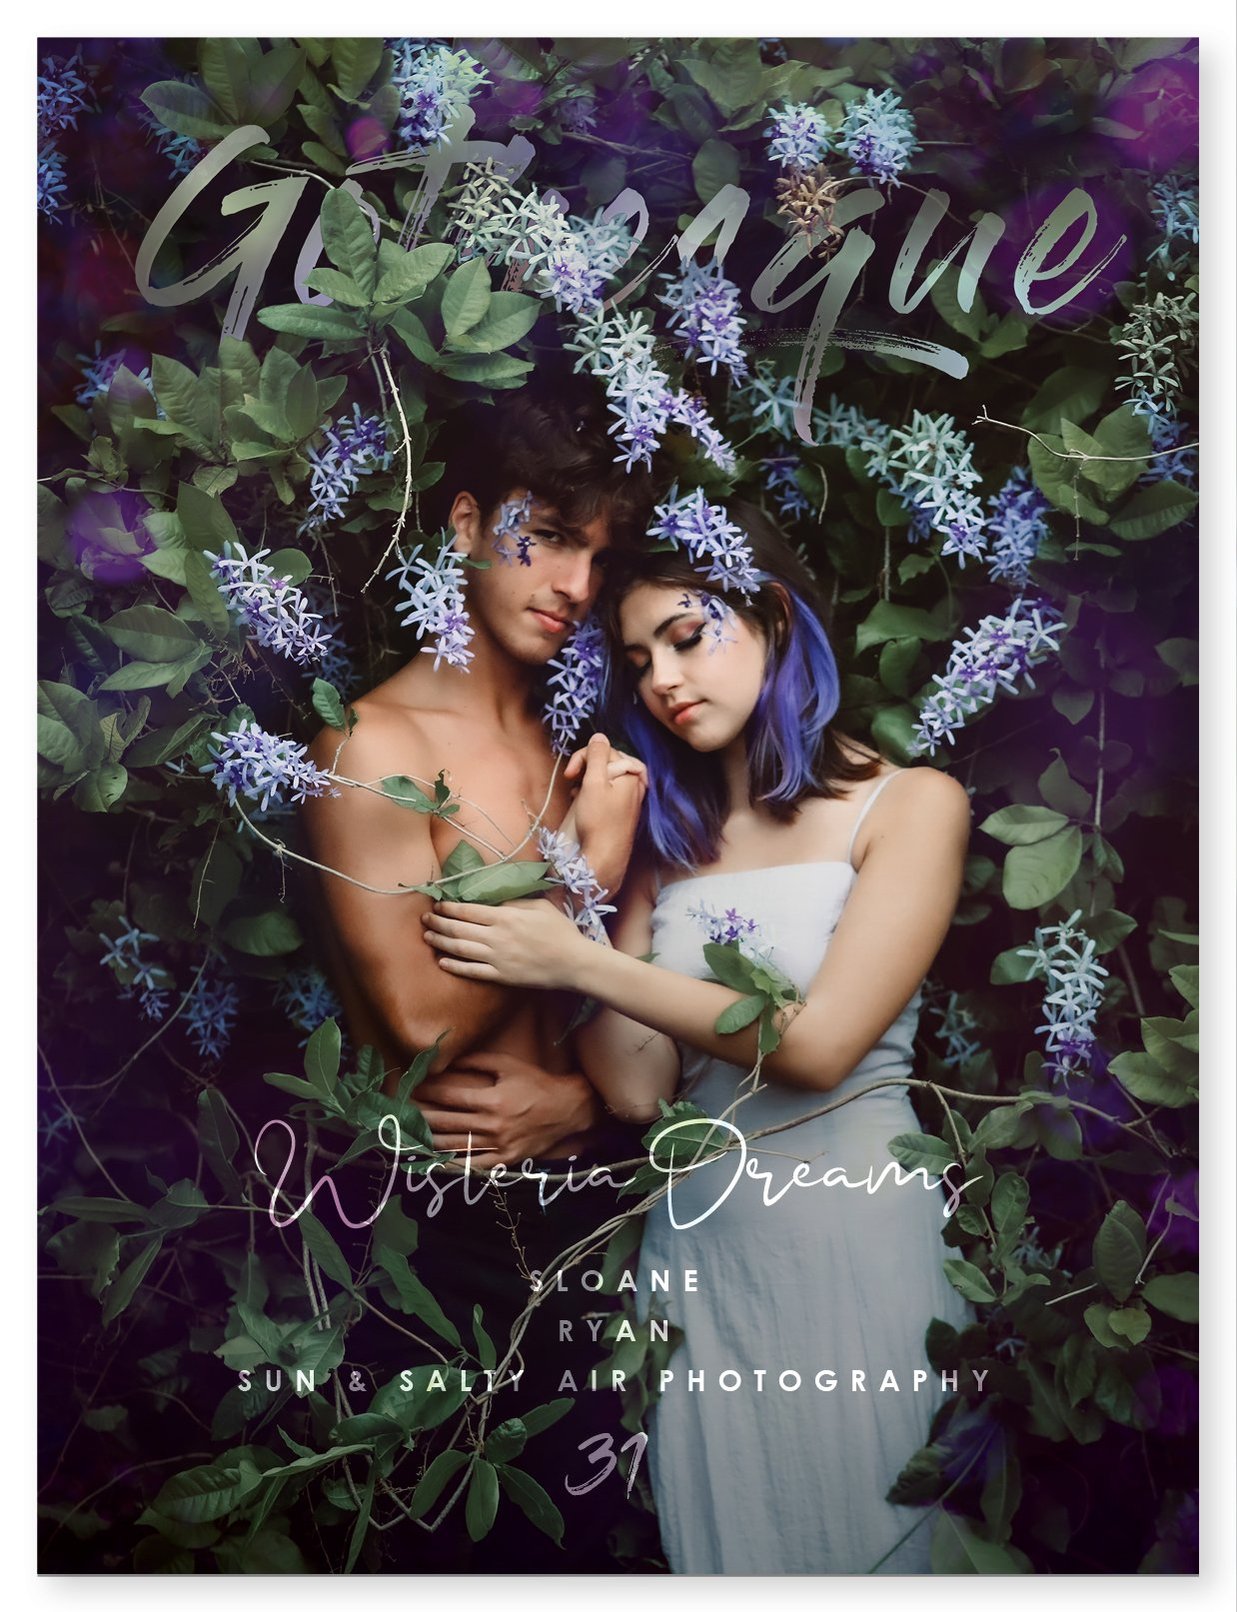 My photography was recently featured again in the latest issue of Gothesque Magazine! The theme for the issue was 'The Delicate Cultivation of Darkness' and my series is titled Wisteria Dreams. 